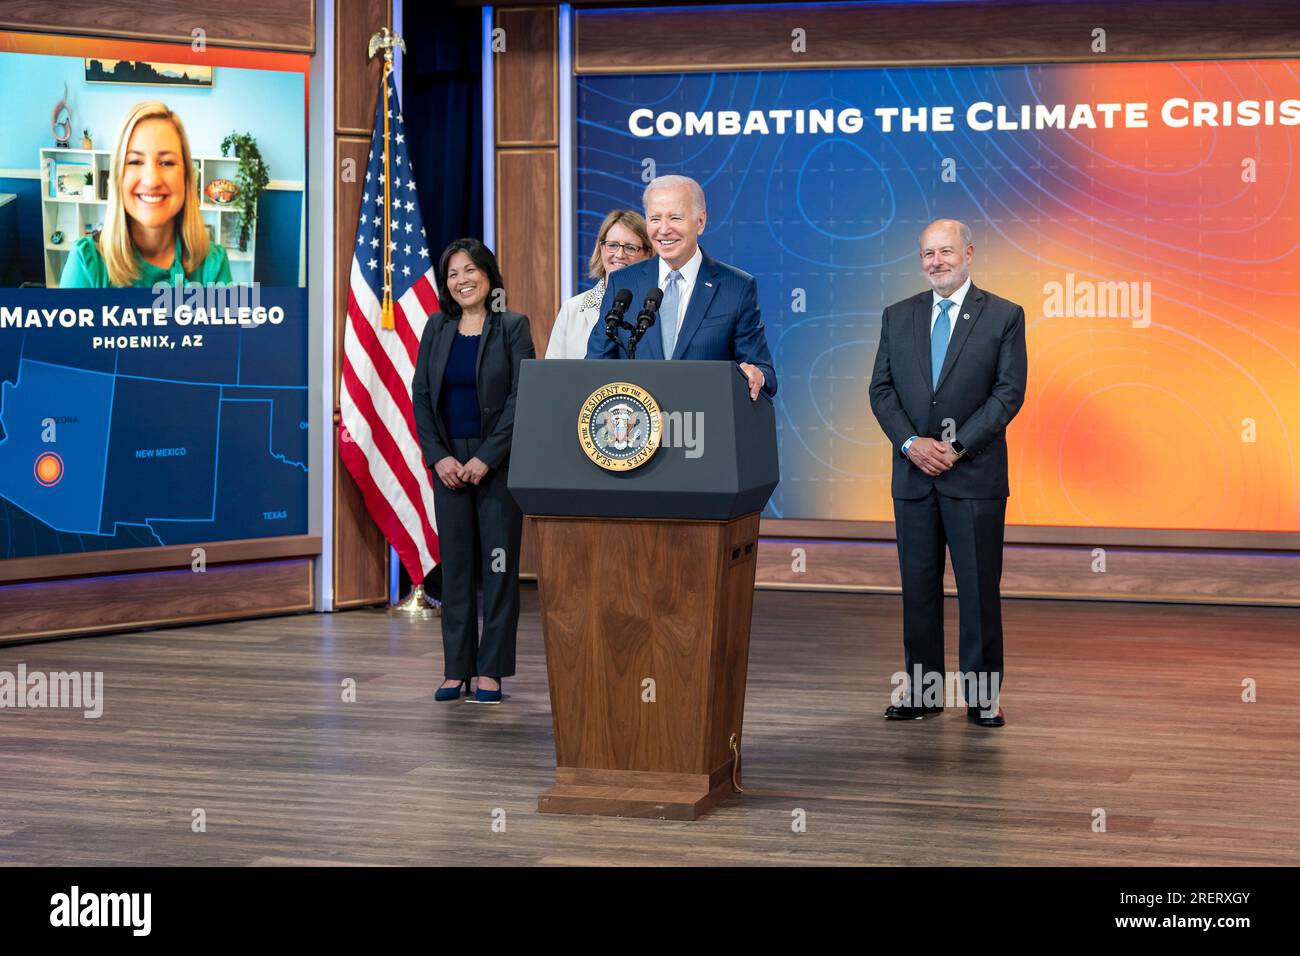 Washington, United States of America. 27 July, 2023. U.S President Joe Biden delivers remarks on new measures aimed at protecting communities from extreme weather at the South Court Auditorium of the White House, July 27, 2023 in Washington, D.C. Joining Biden from left are; Acting Secretary of Labor Julie Su, Federal Emergency Management Agency Administrator Deanne Criswell, and National Oceanic and Atmospheric Administration Administrator Dr. Rick Spinrad.  Credit: Adam Schultz/White House Photo/Alamy Live News Stock Photo